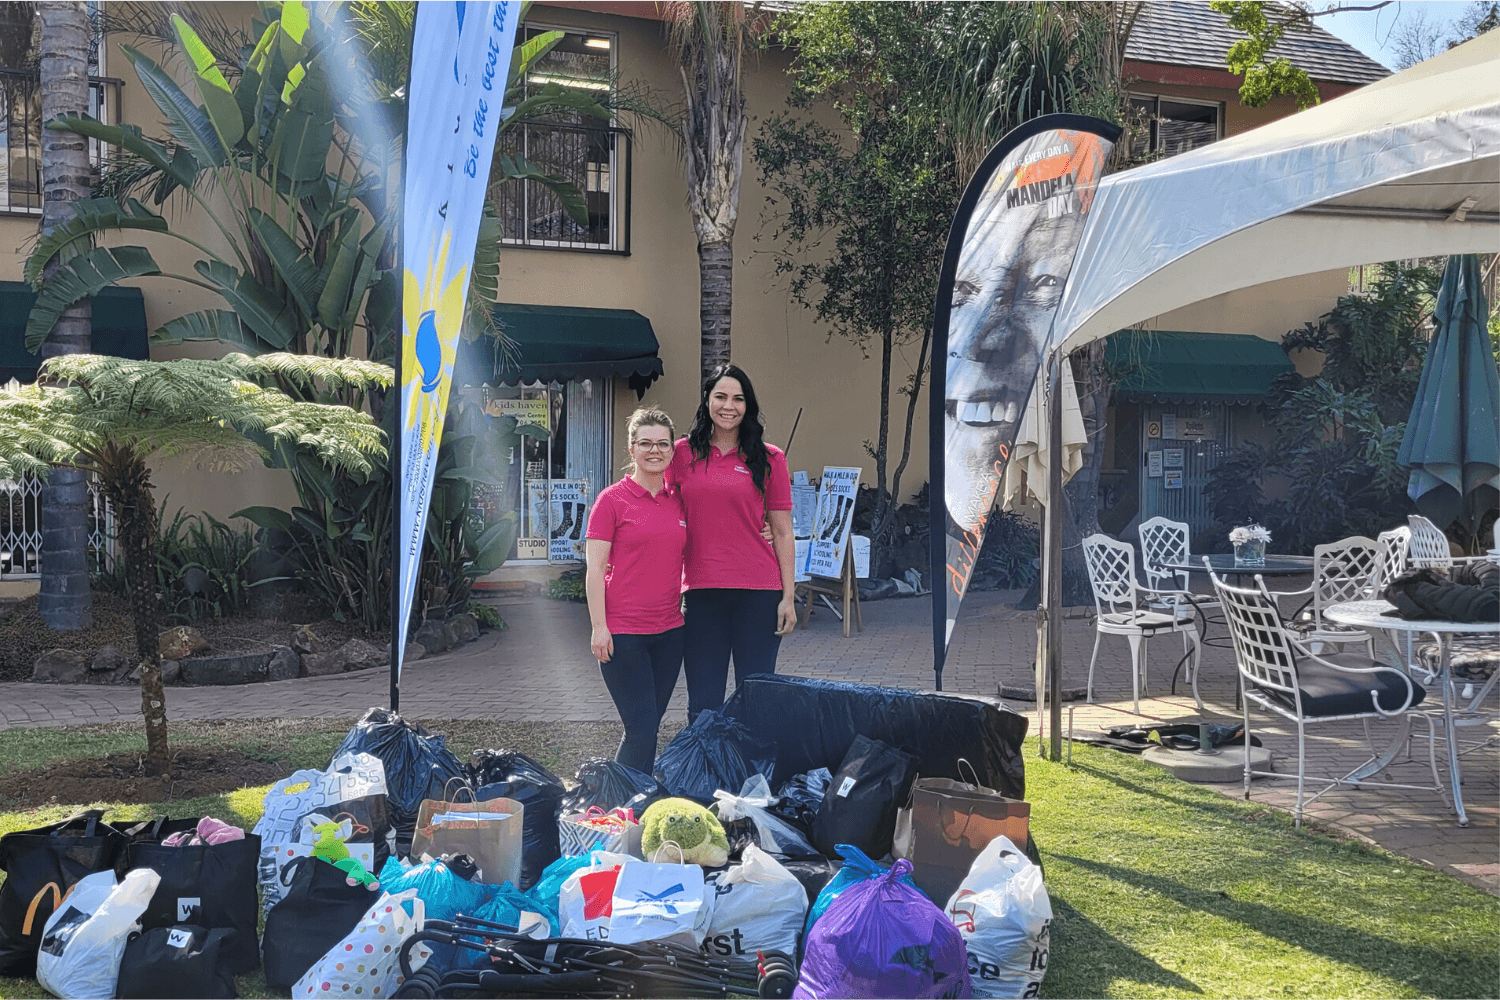 Soloplan donated to “Kid’s Haven” in honor of Mandela Day